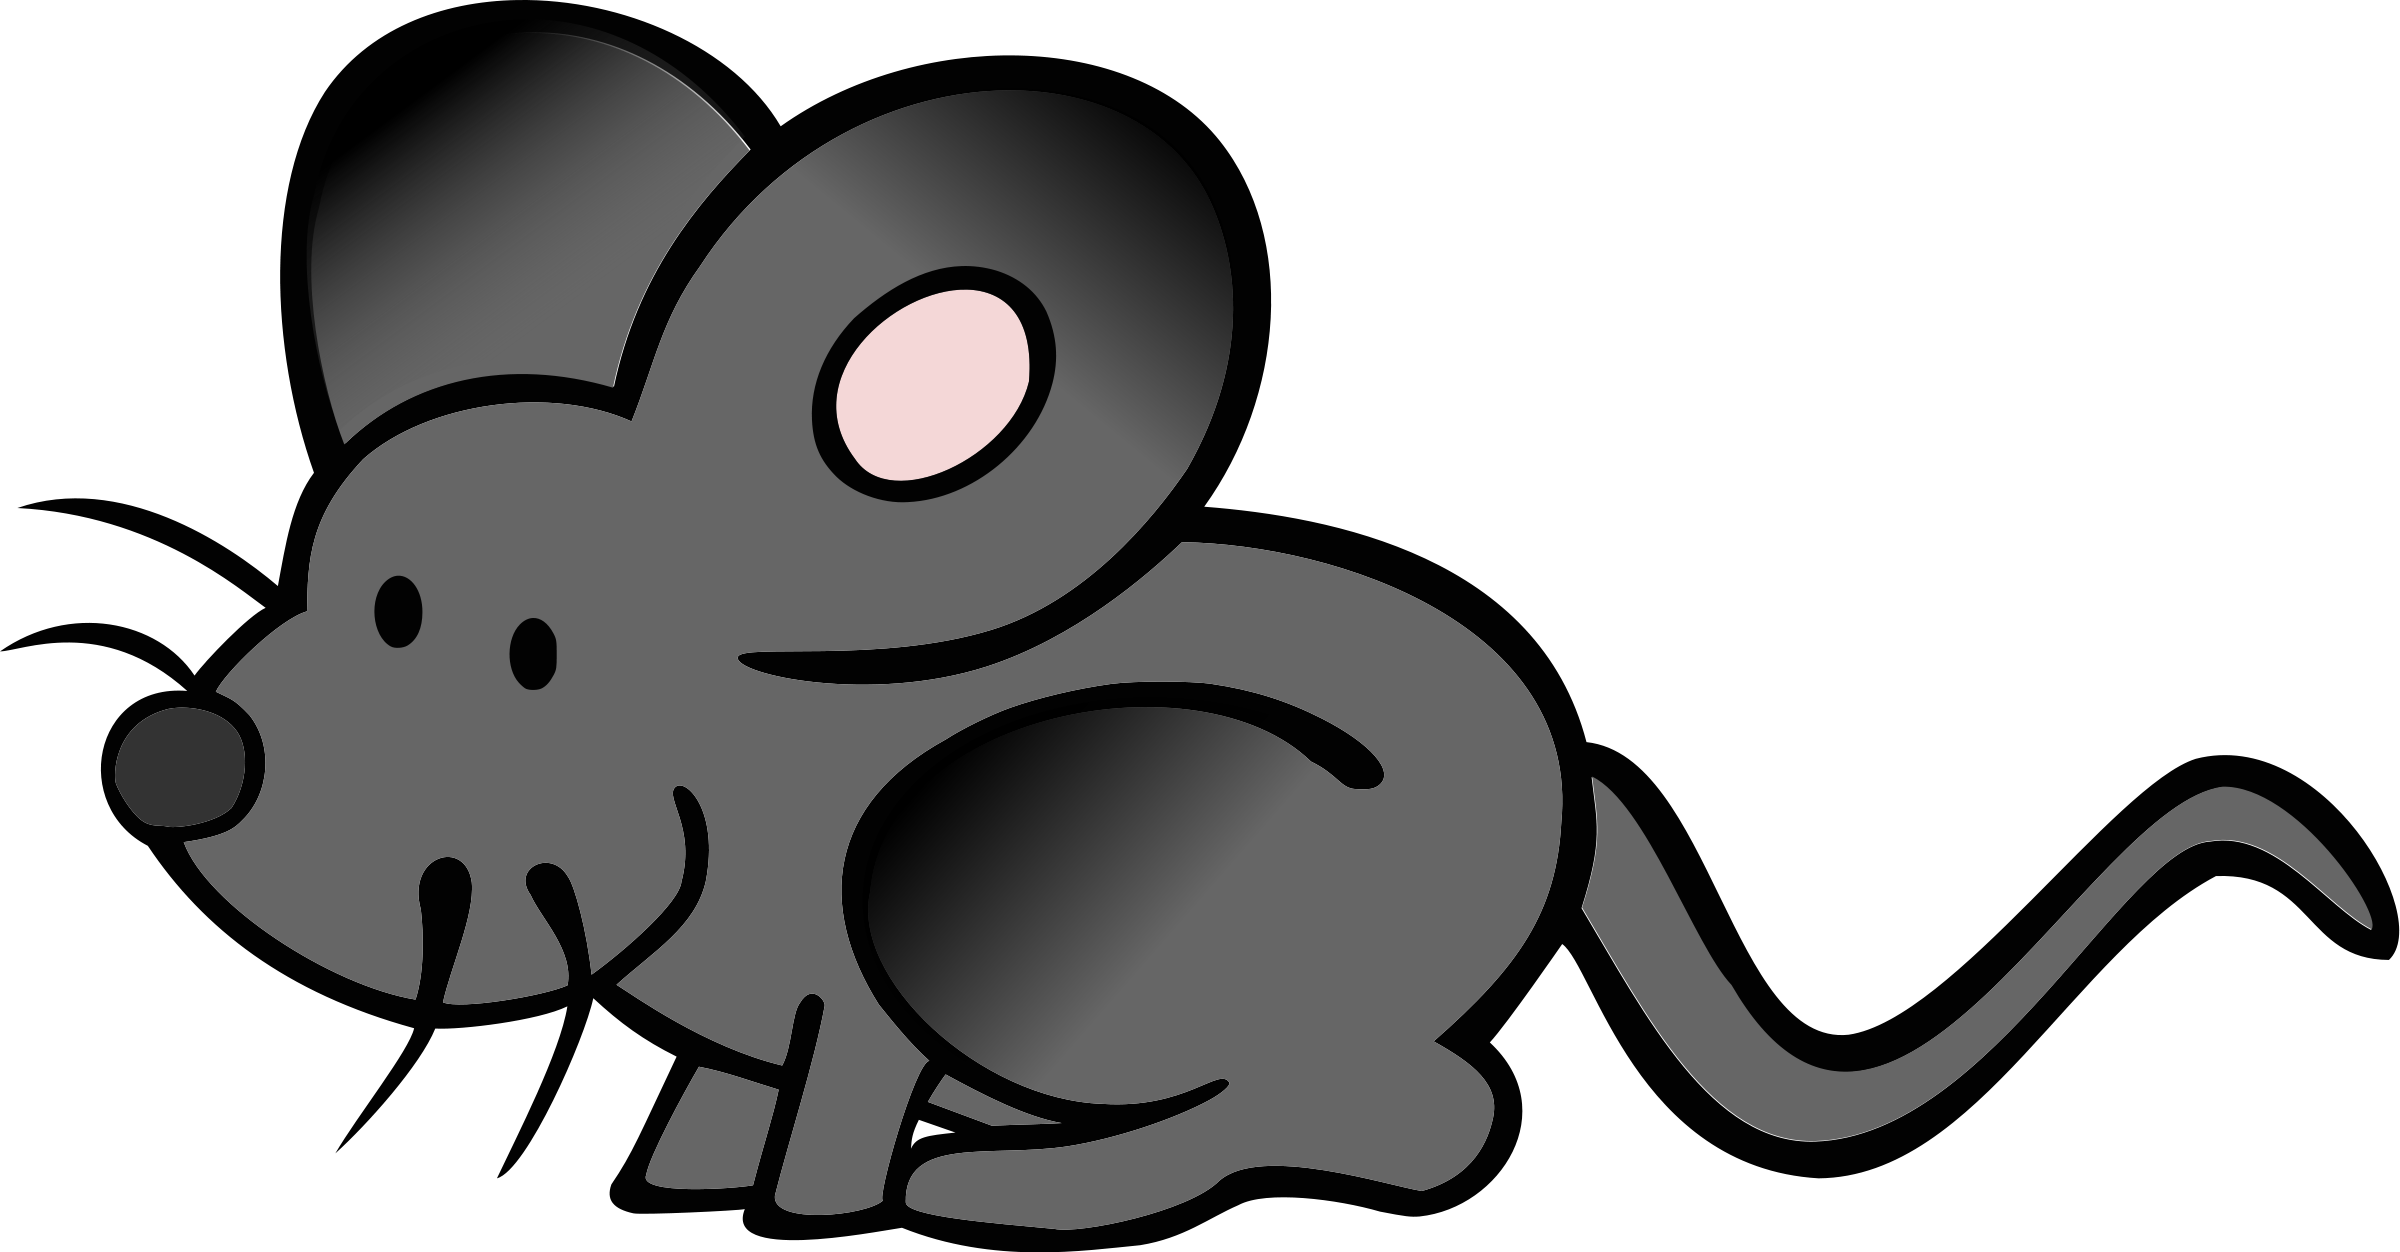 Mouse Cartoon   Clipart Panda   Free Clipart Images